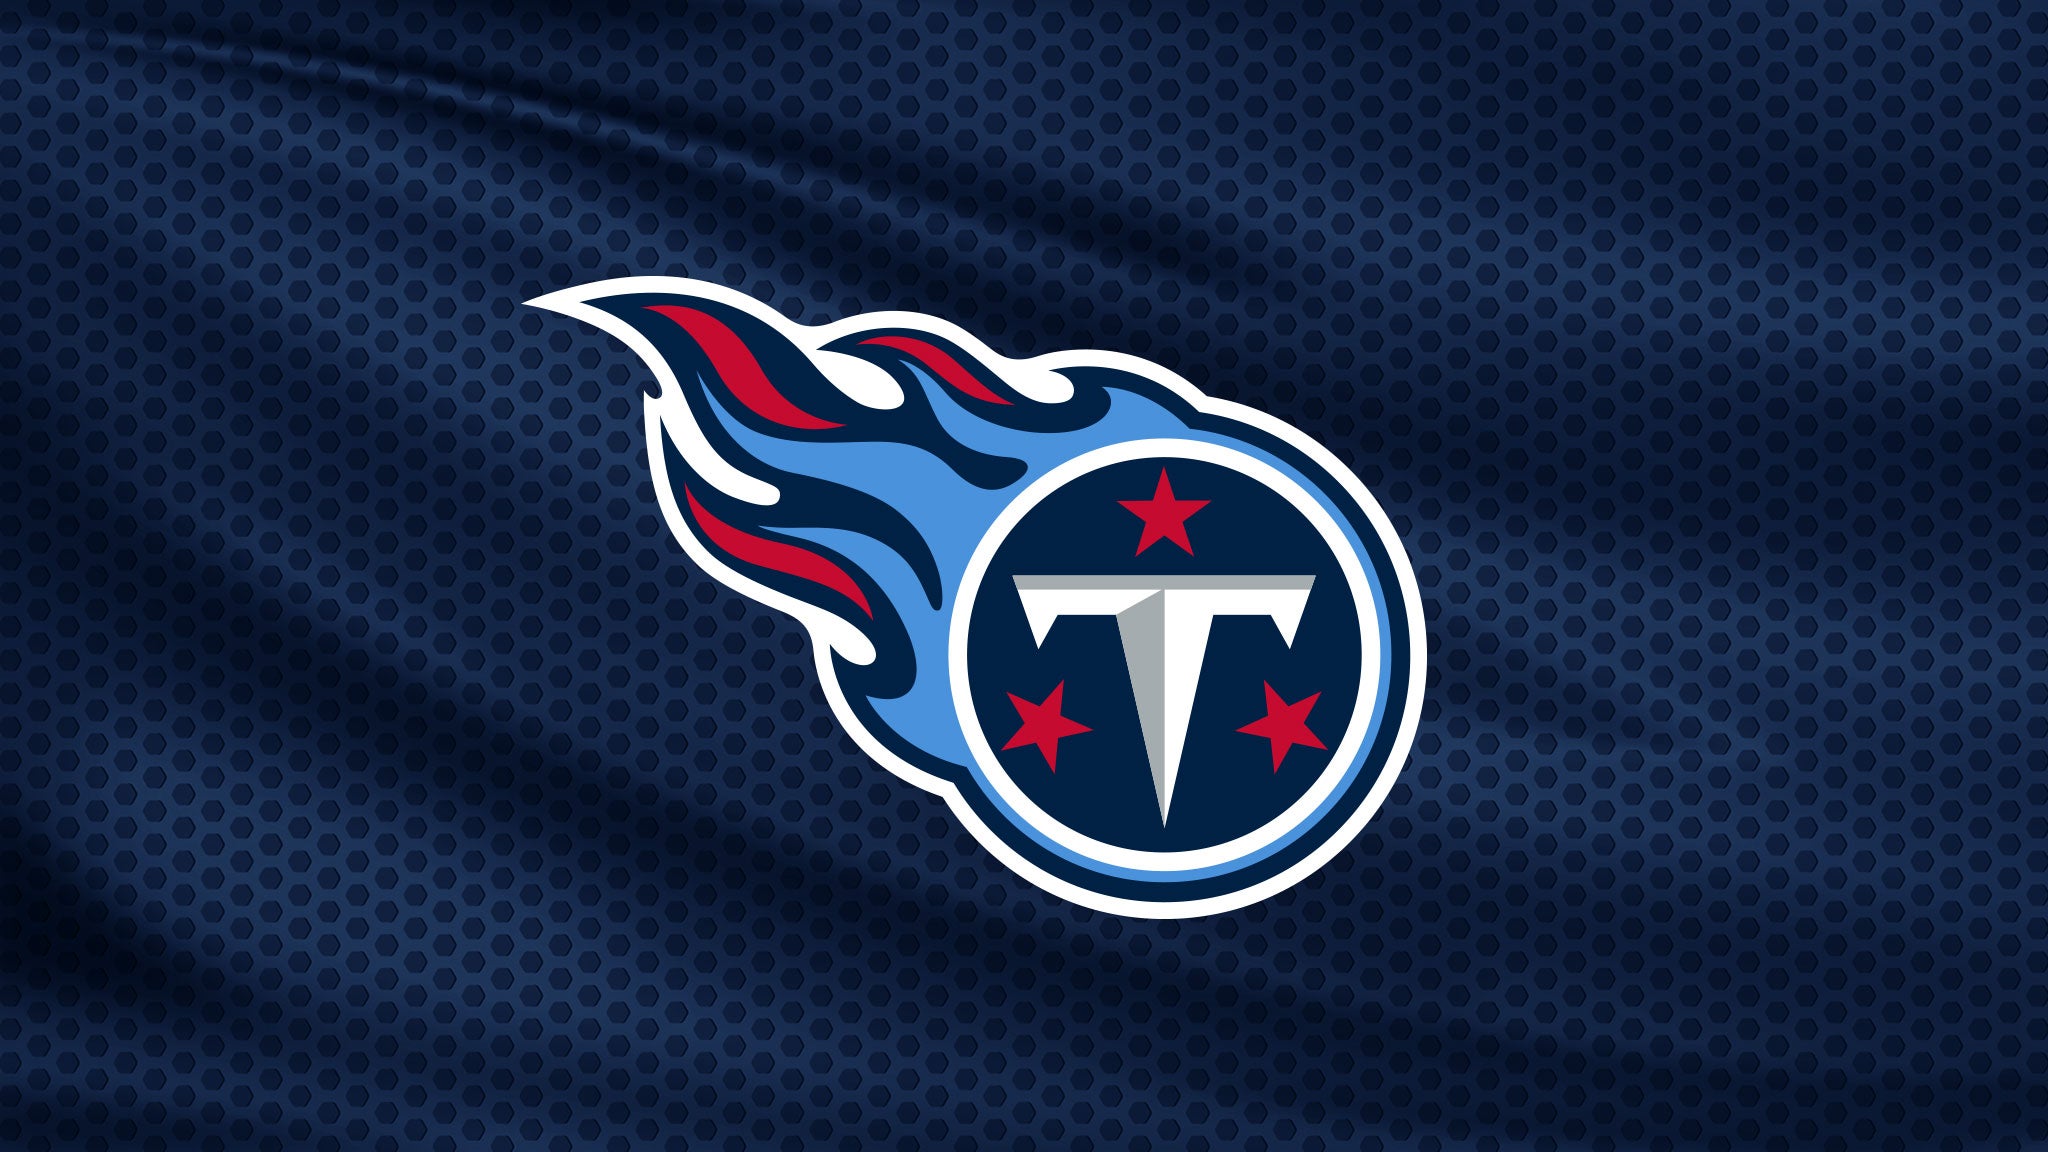 Tennessee Titans vs. Green Bay Packers hero